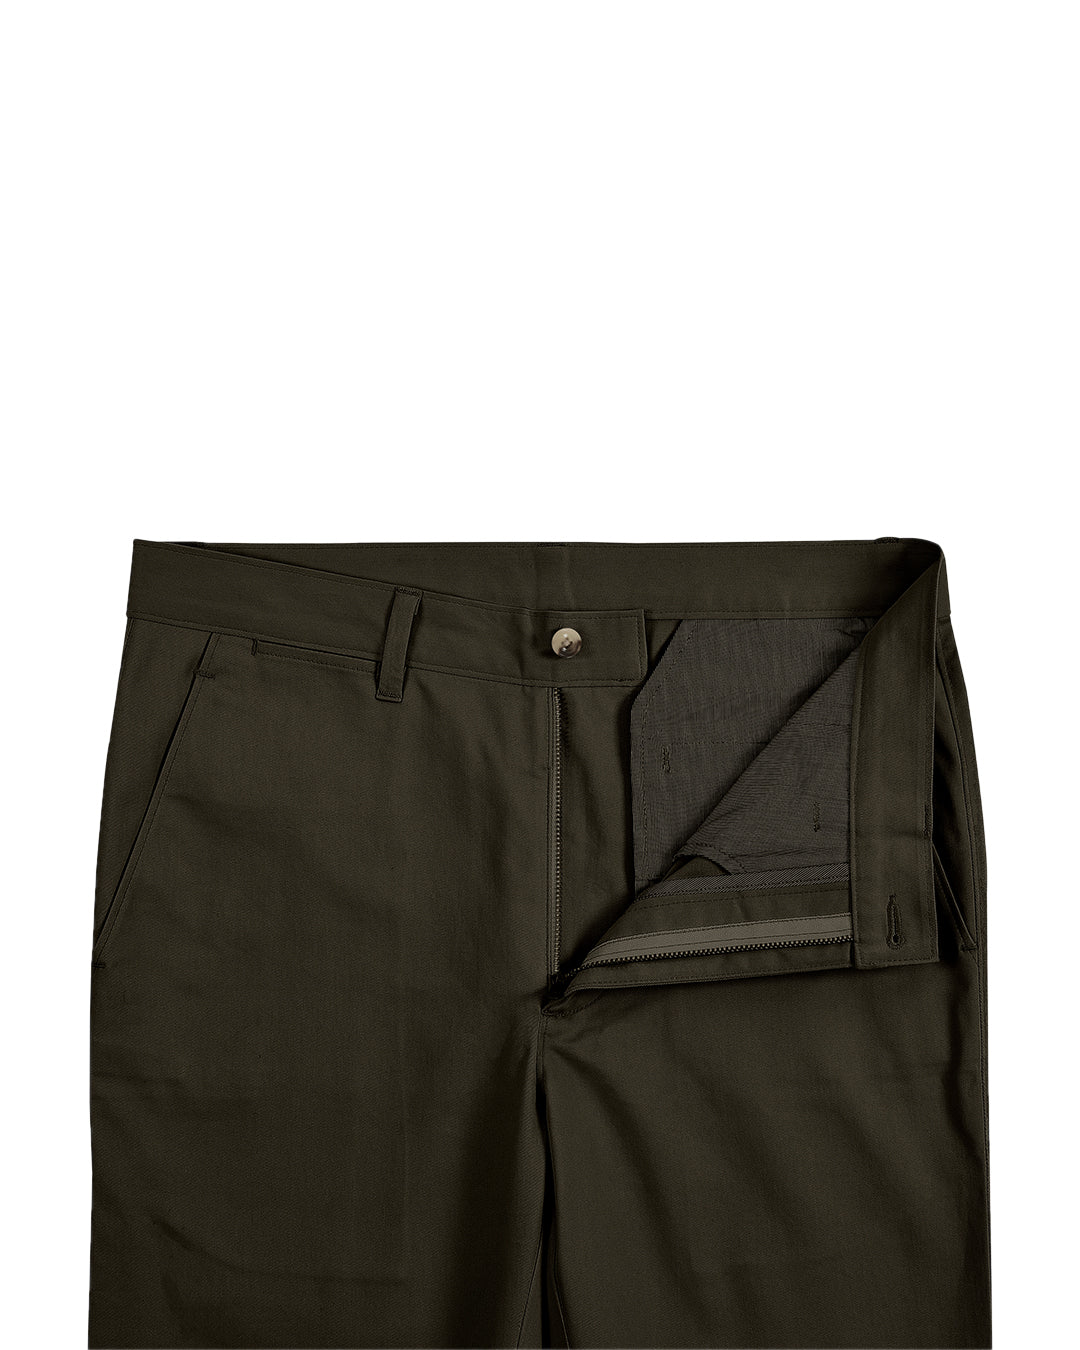 Open front view of custom Genoa Chino pants for men by Luxire in brown